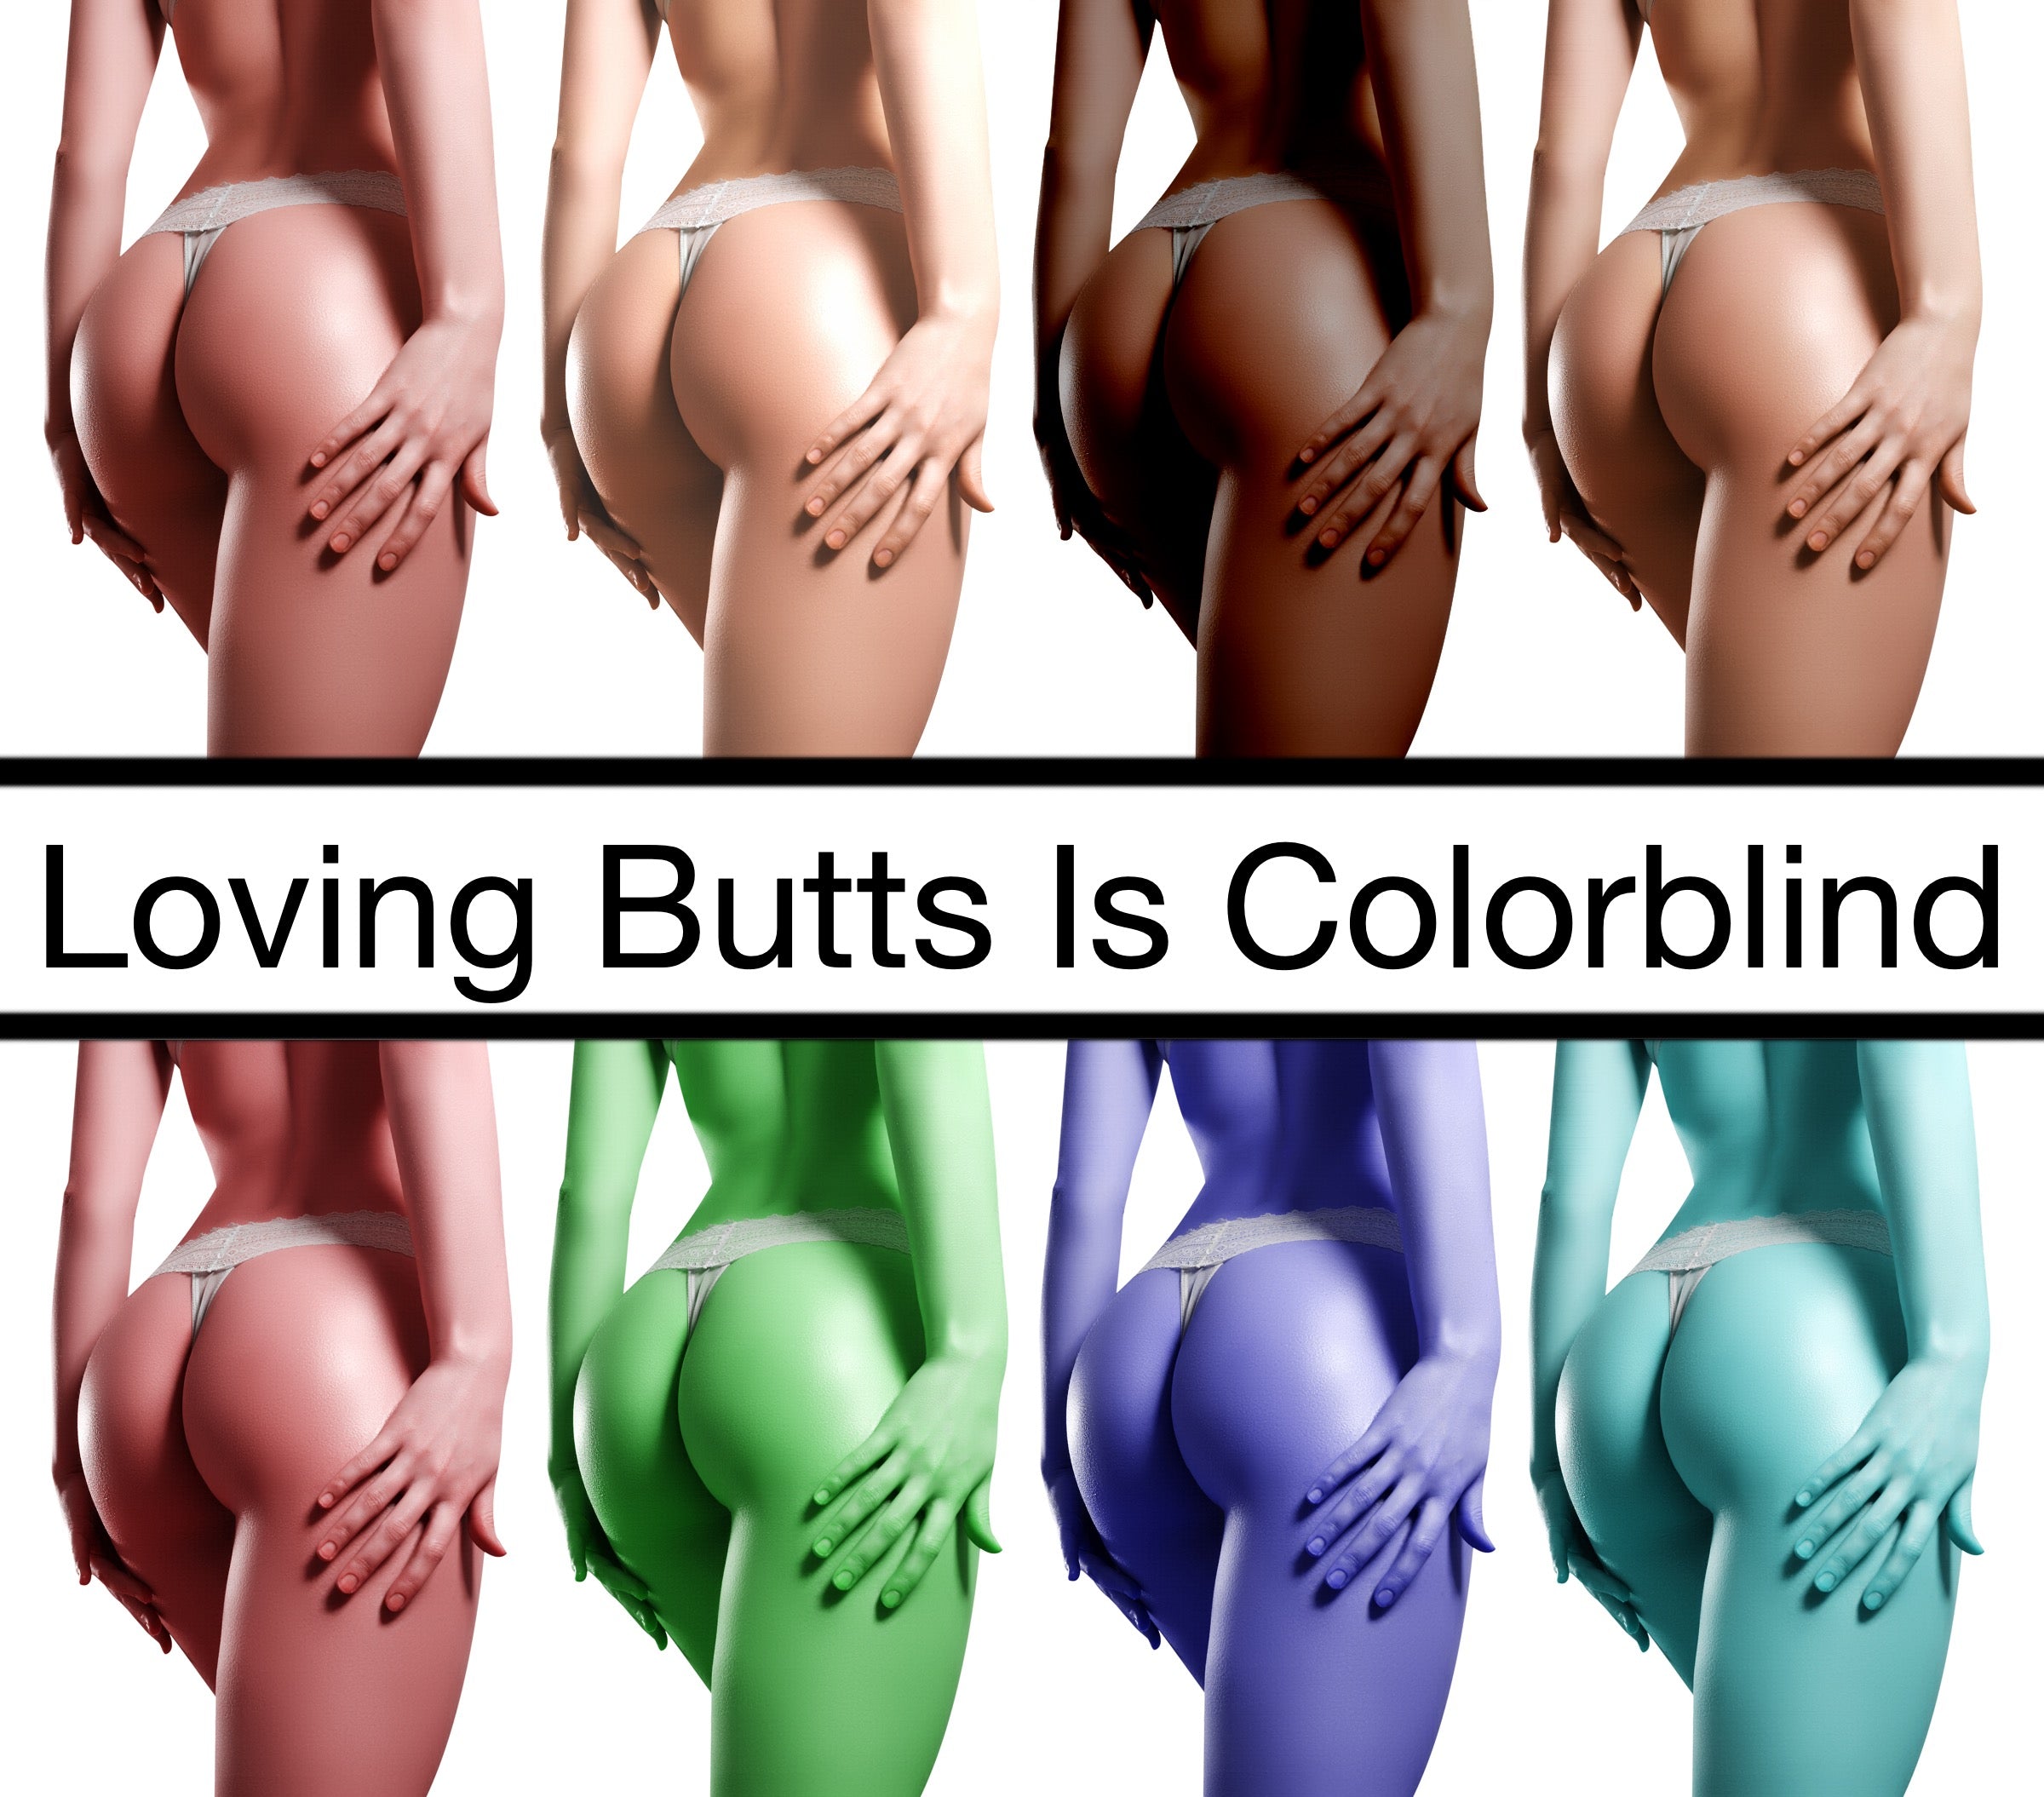 Yes, we like ALL these Butts.